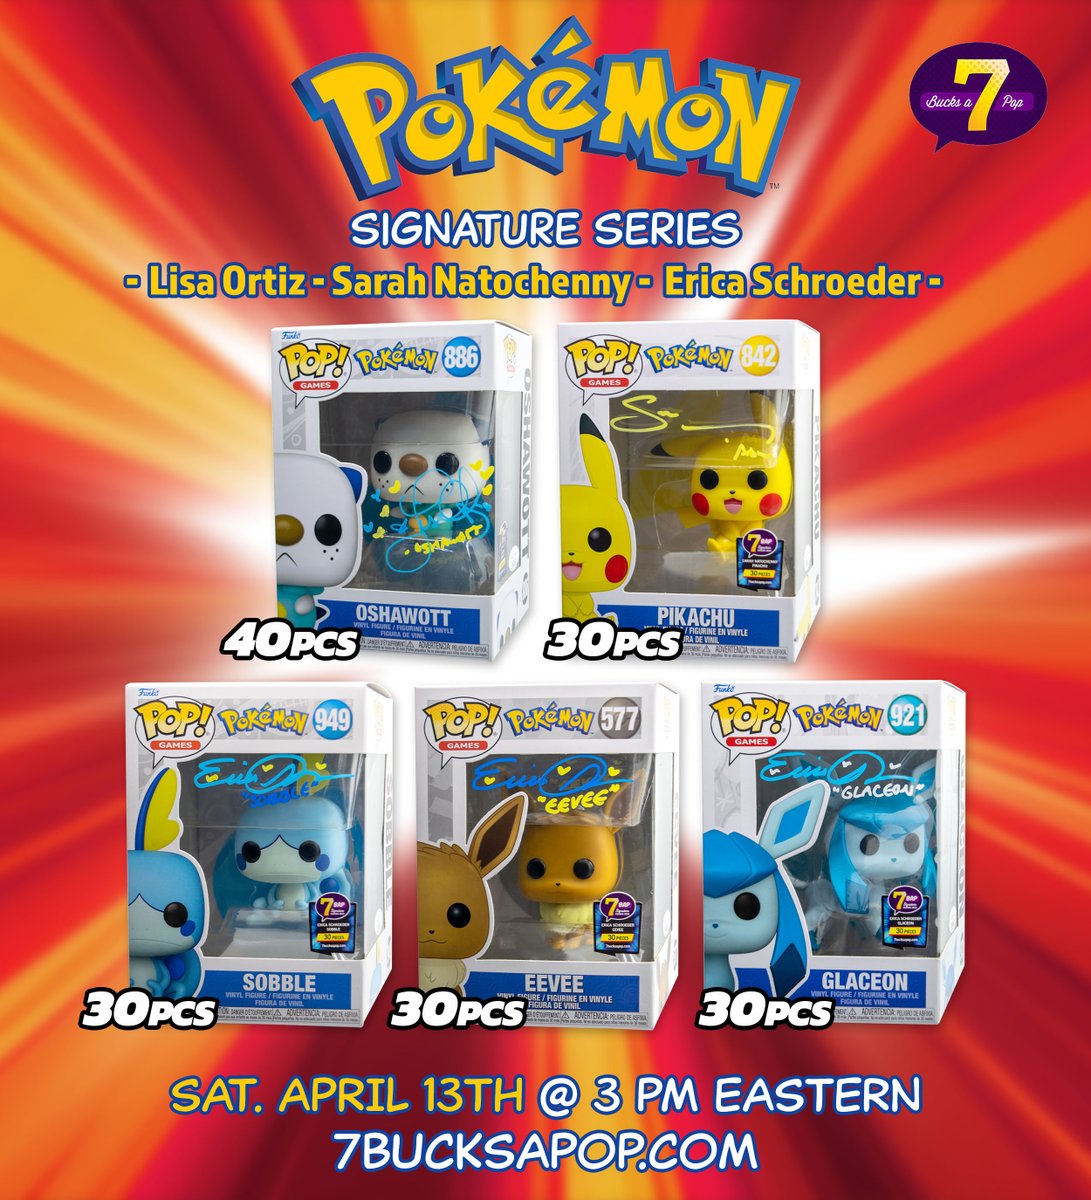 This Saturday April 13th at 3pm Eastern, The #7BAPSignatureSeries proudly presents The Pokémon Signature Series!

You'll have the unique opportunity to pick up an autographed Funko Pops of Lisa Ortiz, Sarah Natochenny, & Erica Schroeder!

Lisa Ortiz as Oshawott (40pcs) - $85 +